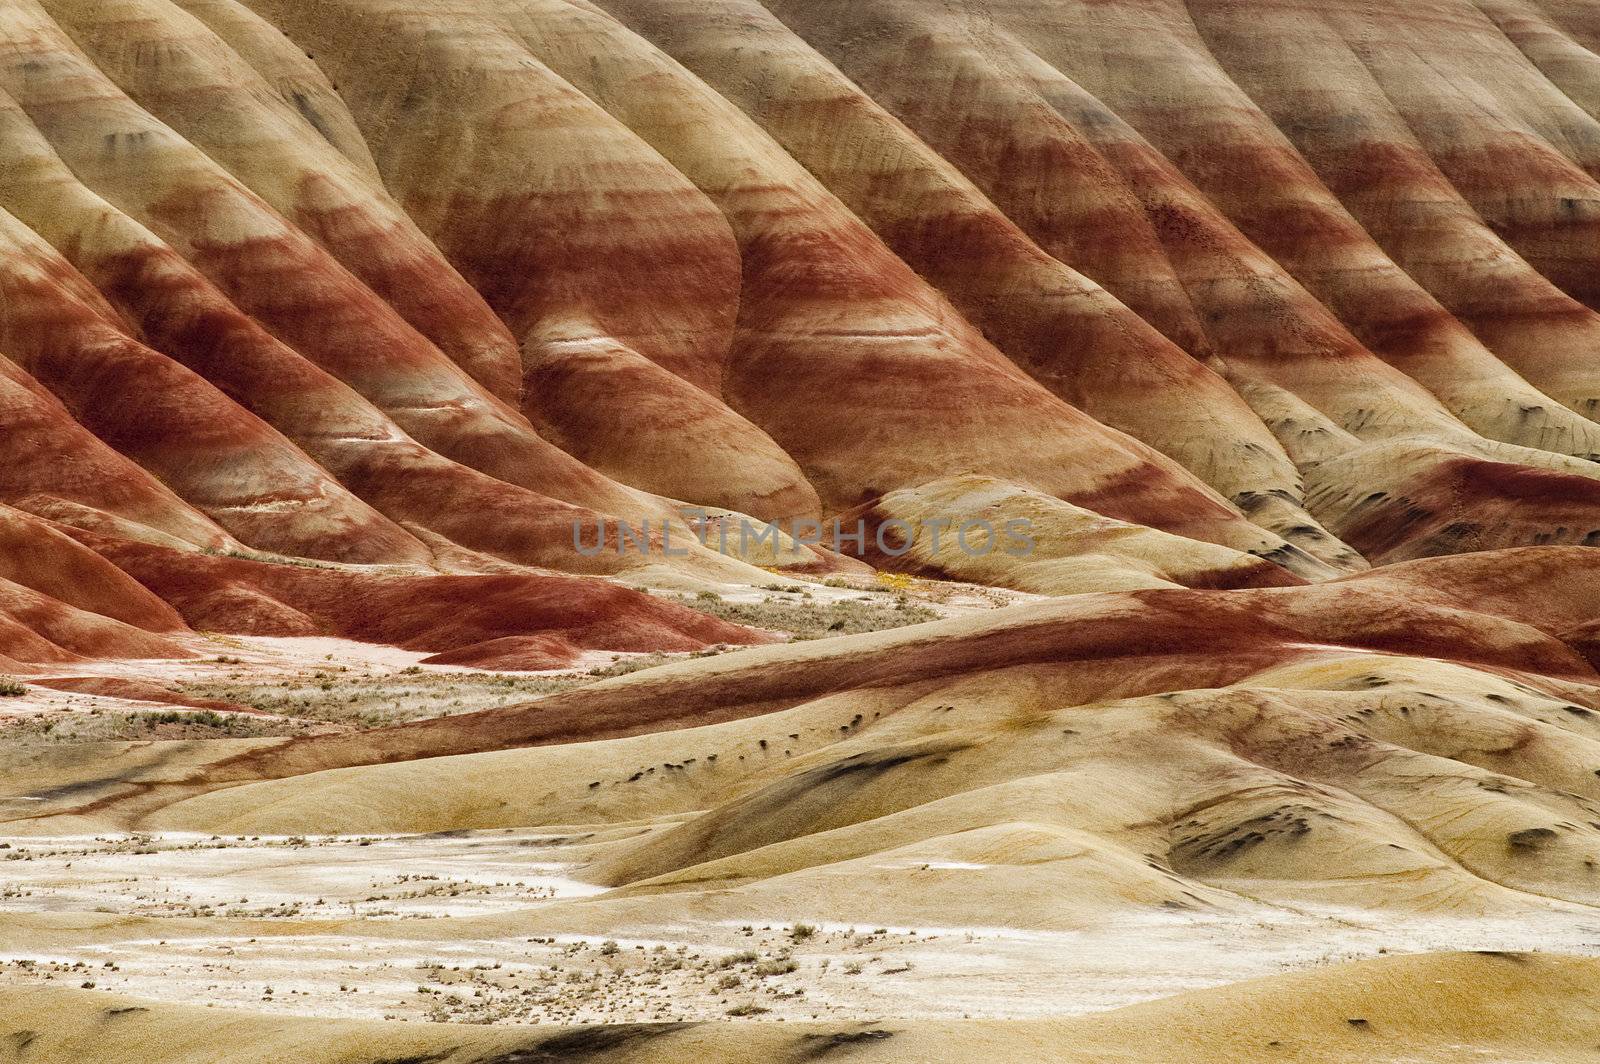 The Geology in Painted Hills Oregon State by ChrisBoswell